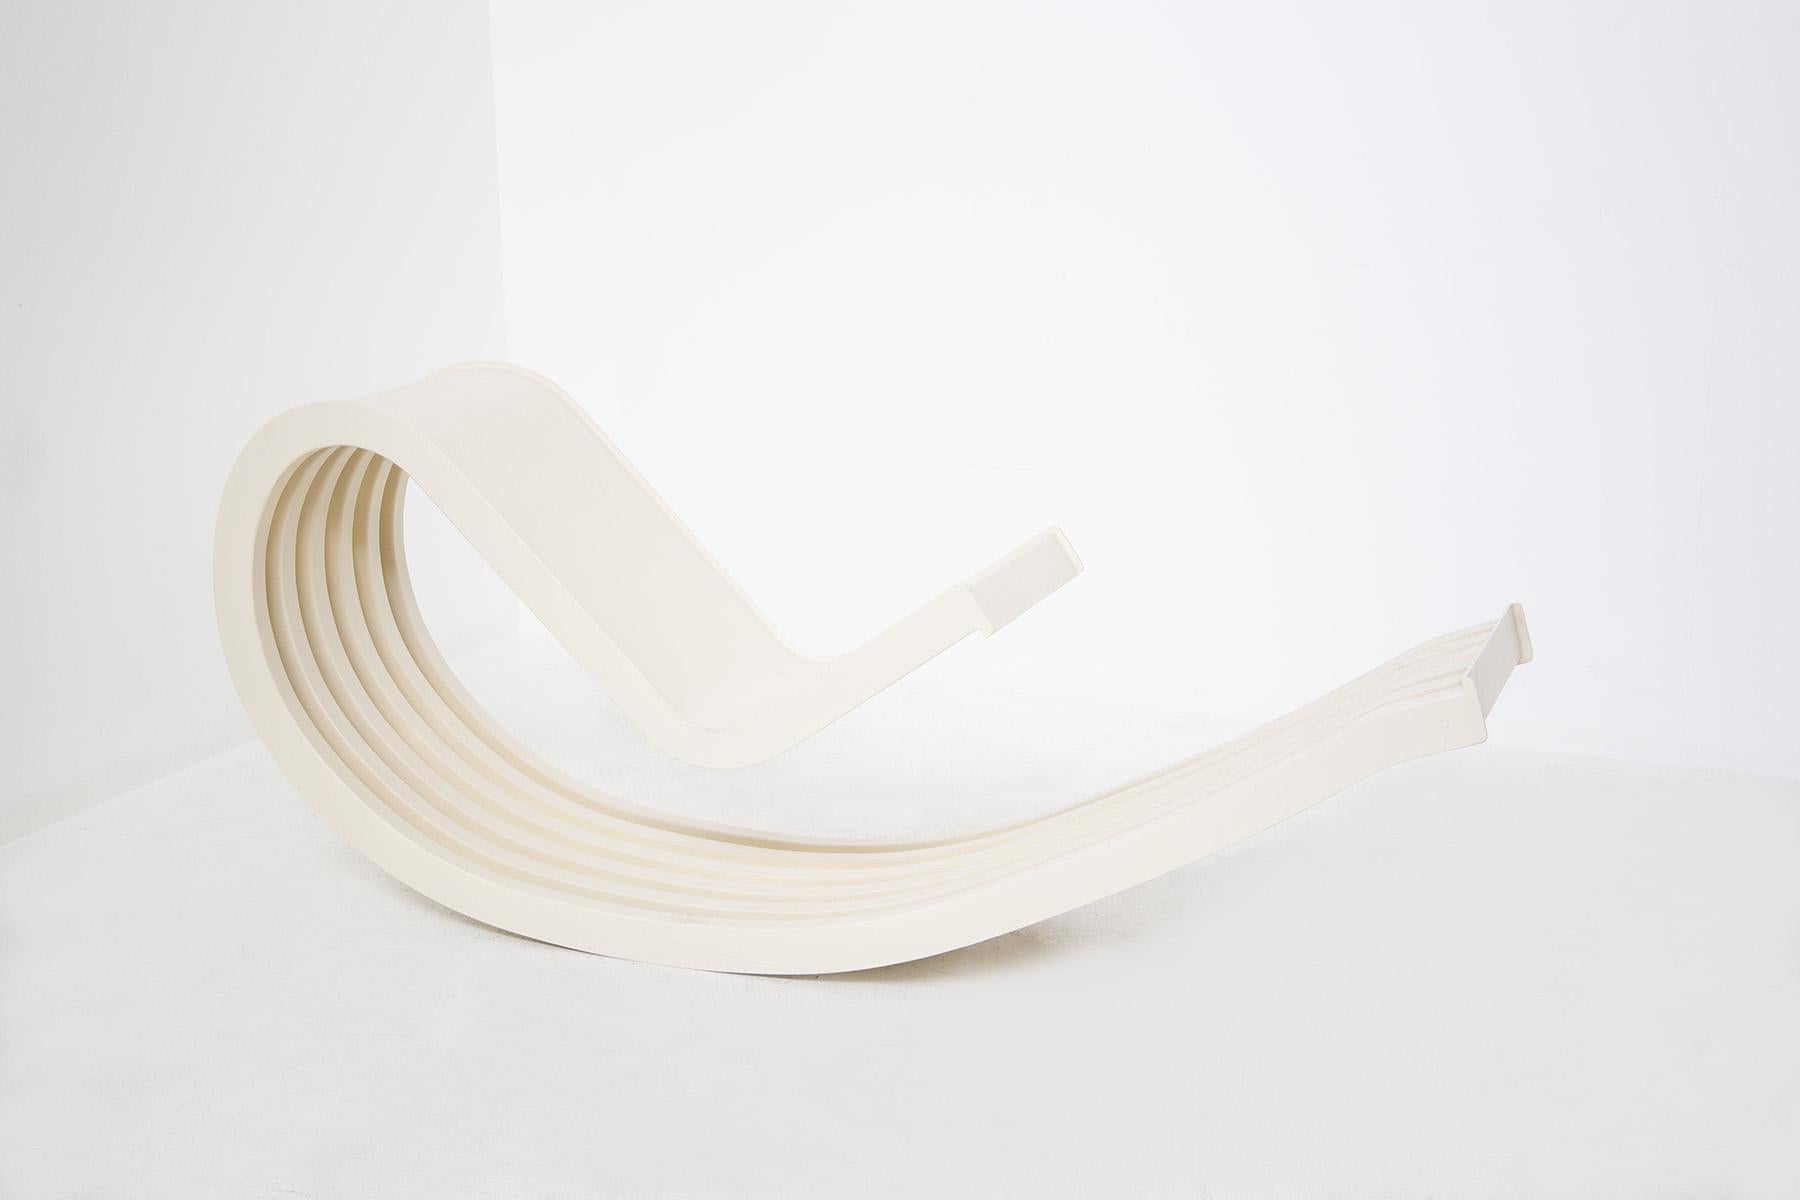 Dondolo designed by Leonardi and Franca Stagi one evening in 1965.
Made of white fiberglass. The curve of the unique line that makes up the chair offers a profile that is both serpentine and calligraphic.The appeal of this Dondolo chair has much to